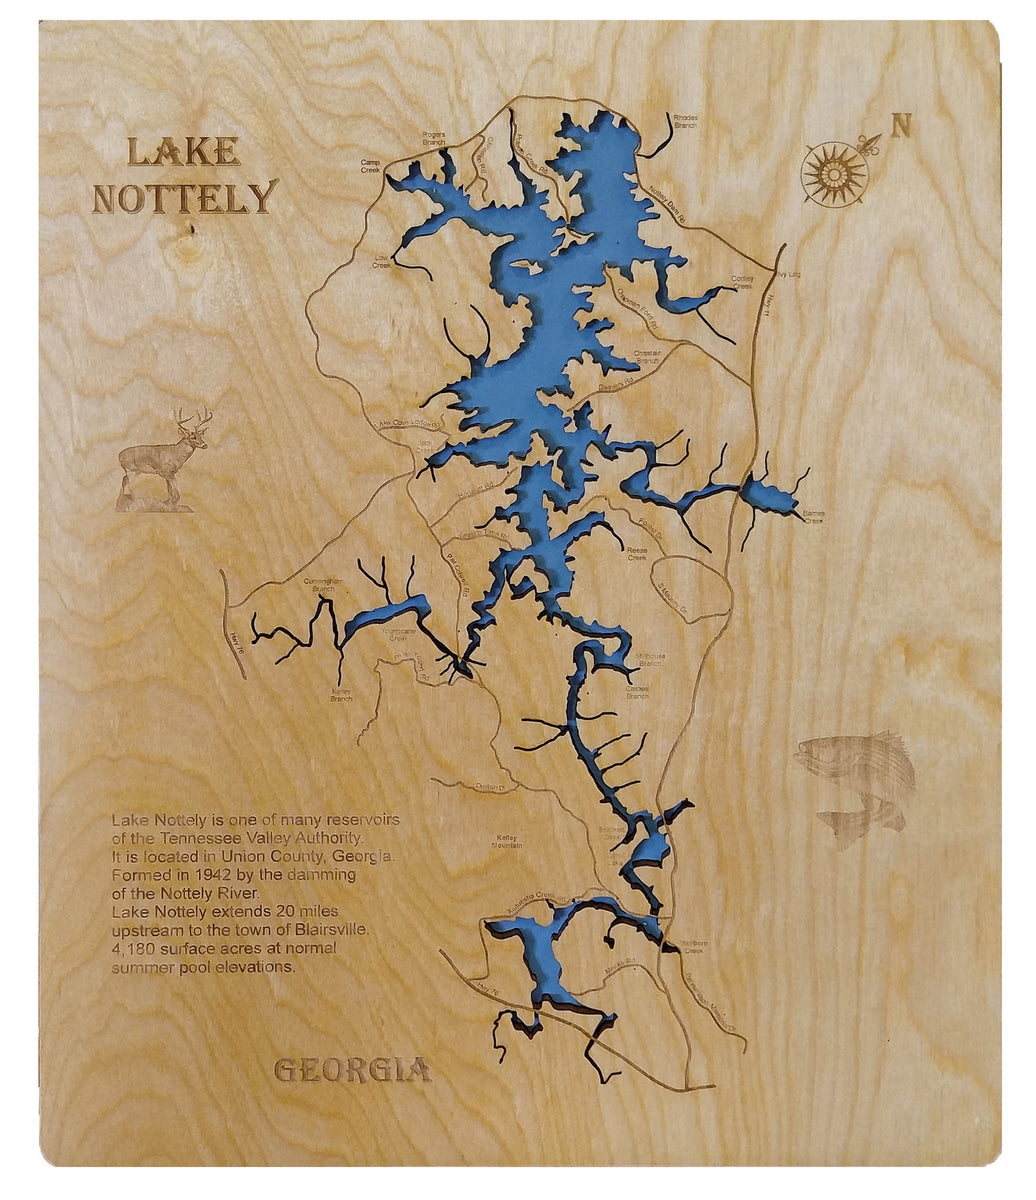 lake-nottely-georgia-laser-cut-wood-map-personal-handcrafted-displays